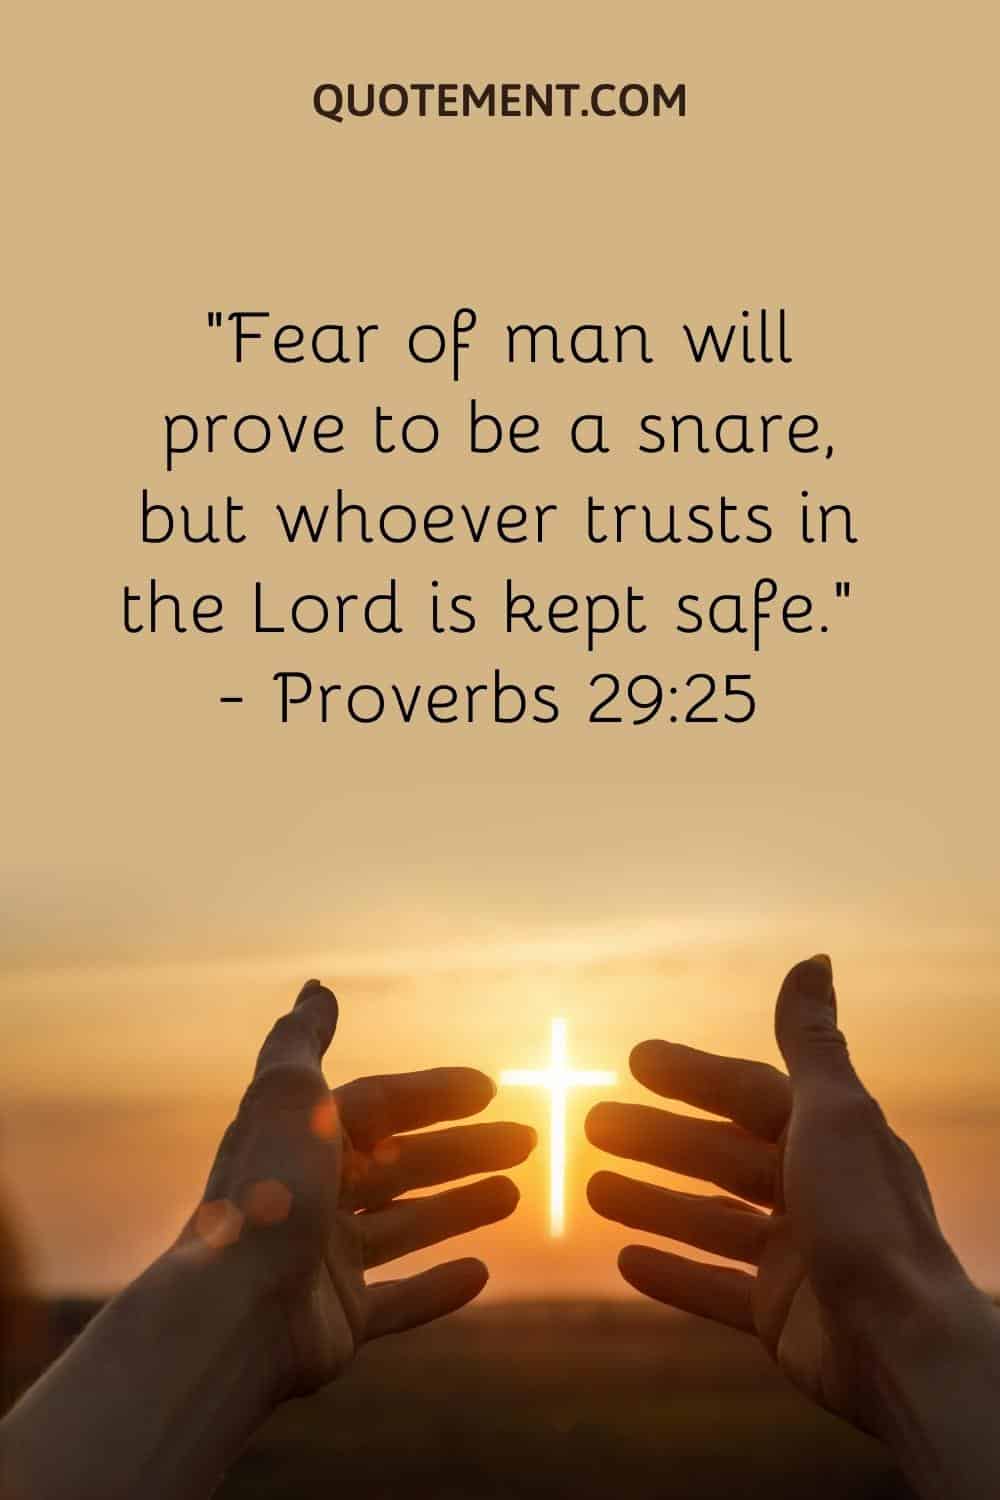 “Fear of man will prove to be a snare, but whoever trusts in the Lord is kept safe.” — Proverbs 2925